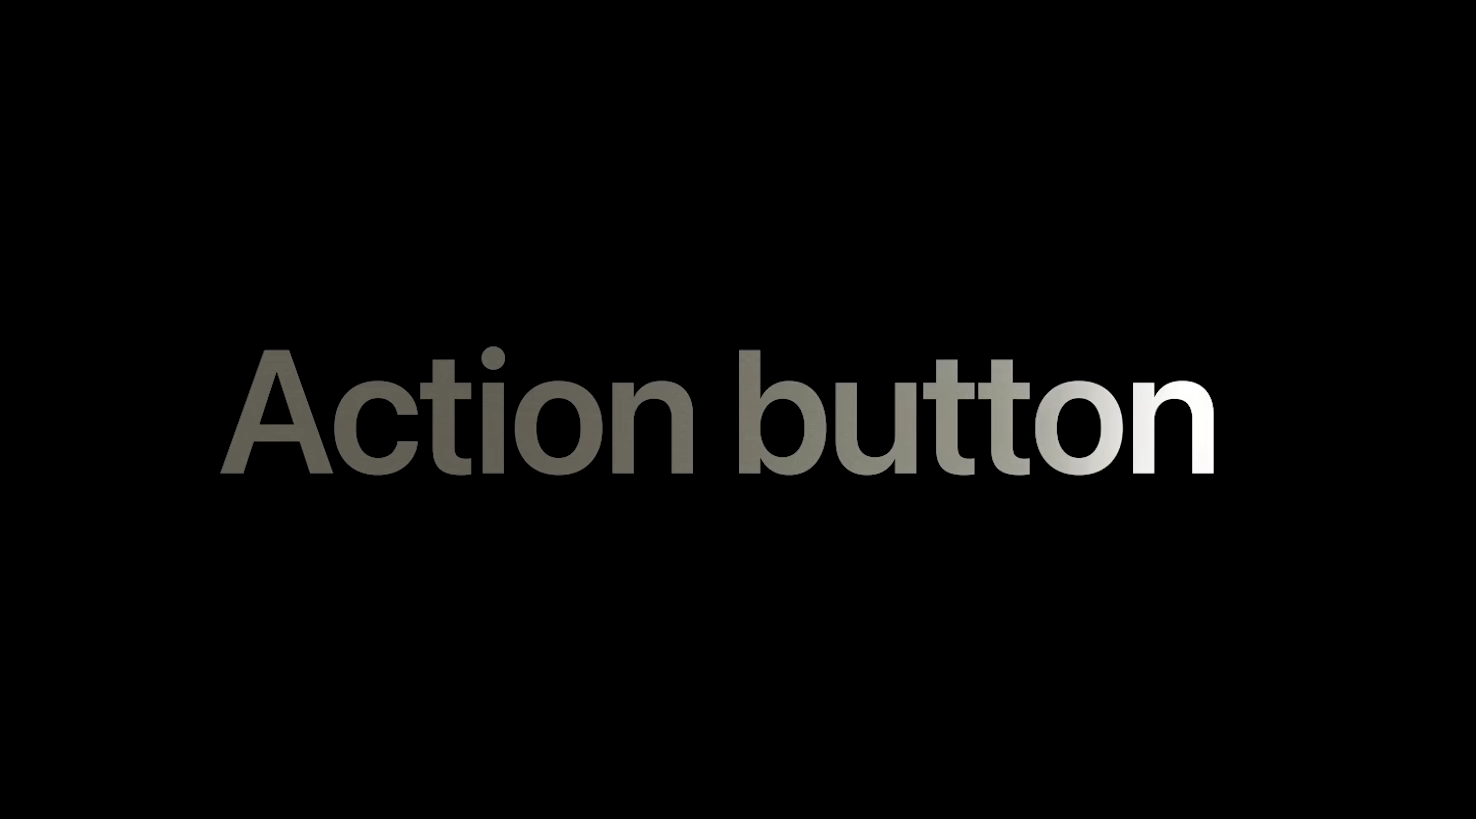 The new Action button on iPhone 15 Pro: A new level of Shortcut Integration.